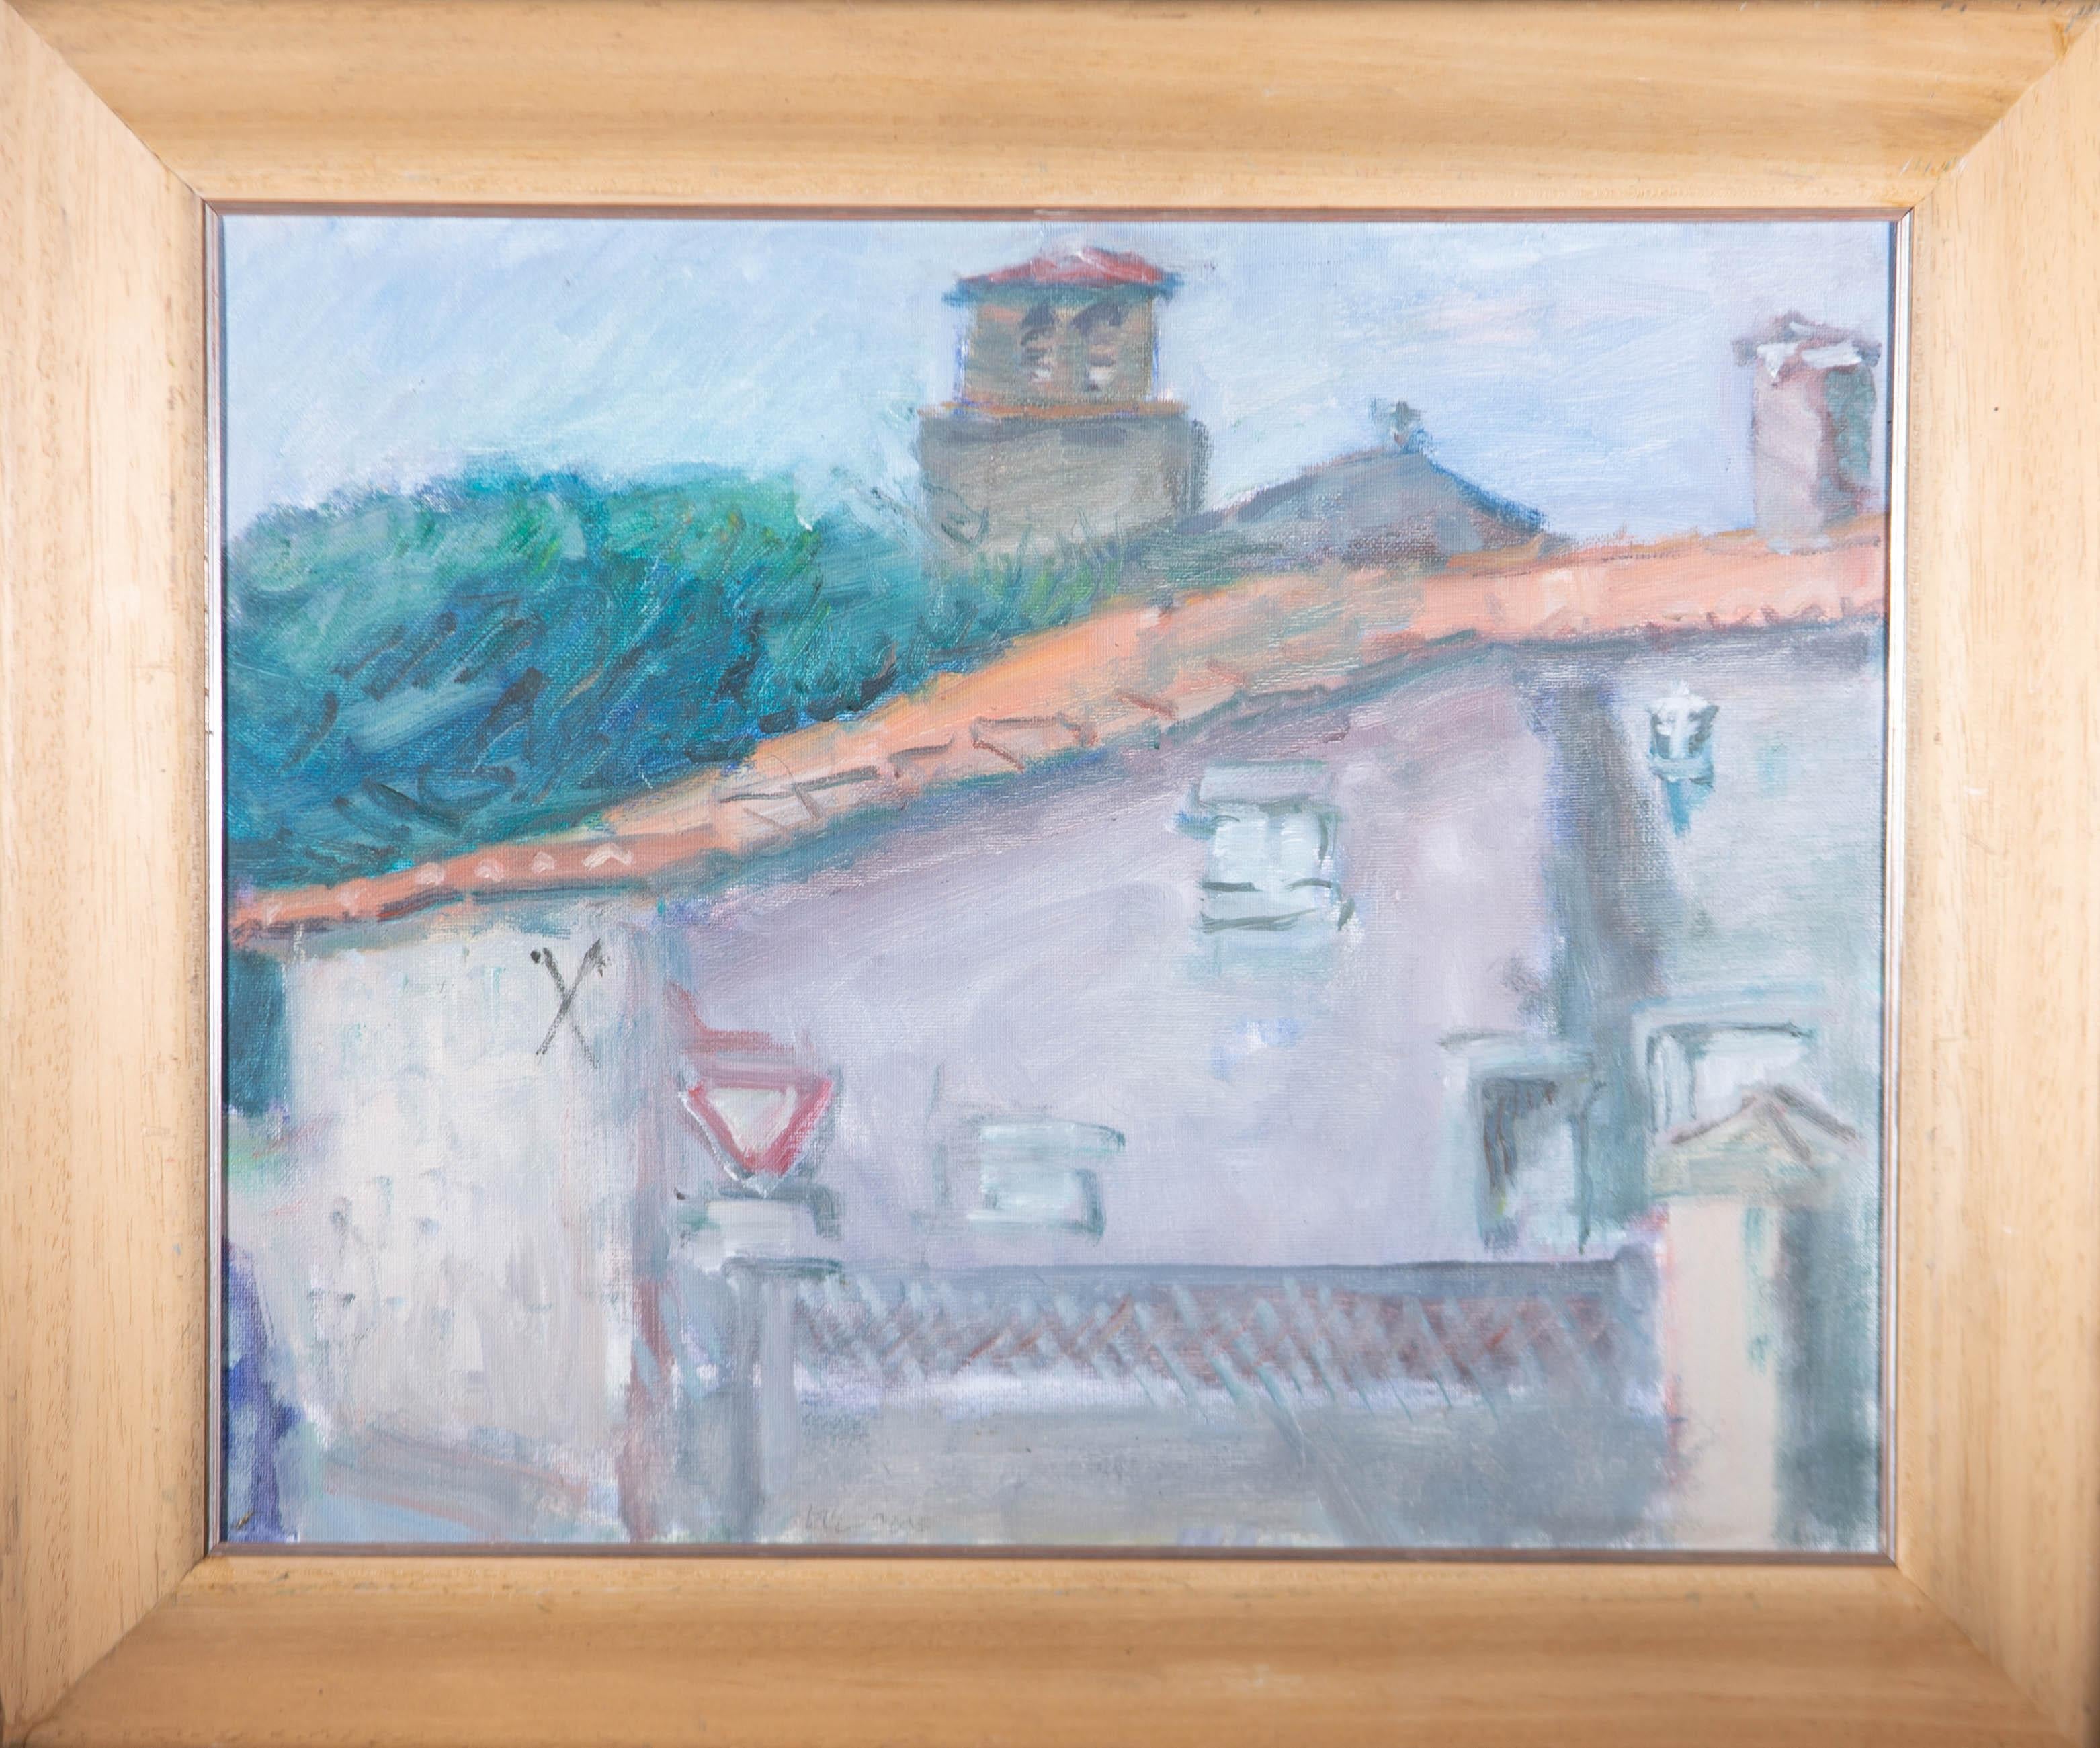 Oils are used in an impressionistic manner to depict a fine study of Azay, France. The artwork is well presented in a wood frame with a gilded inner window. Signed and inscribed on the reverse. On canvas on stretchers.
